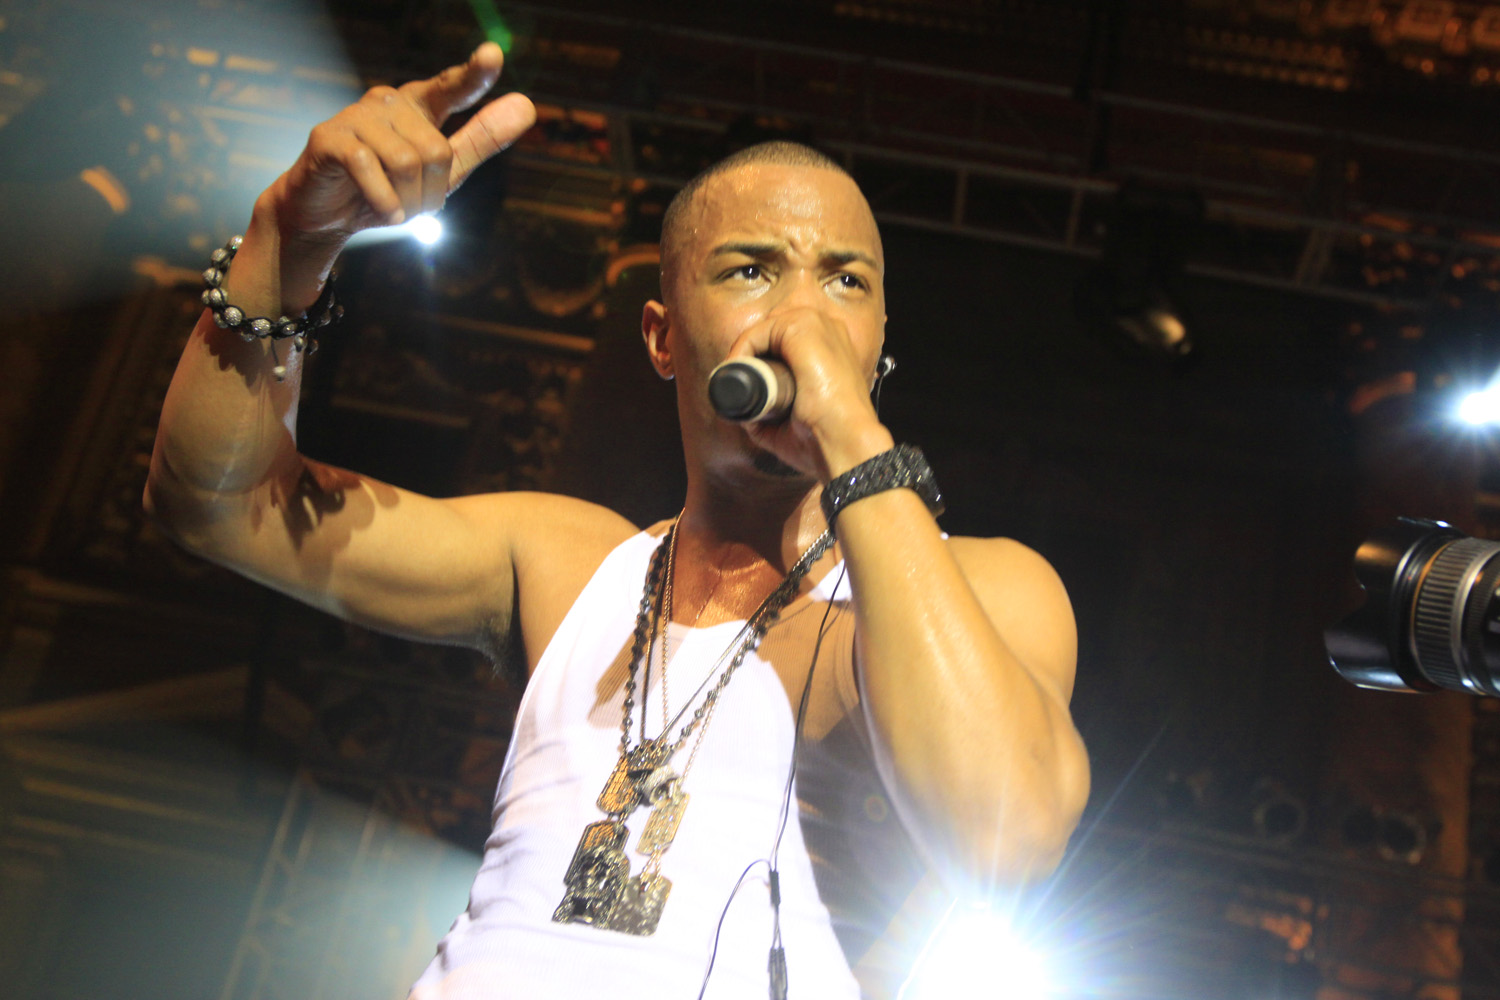 Axe Music presents T.I. @ Capitale on August 16, 2010